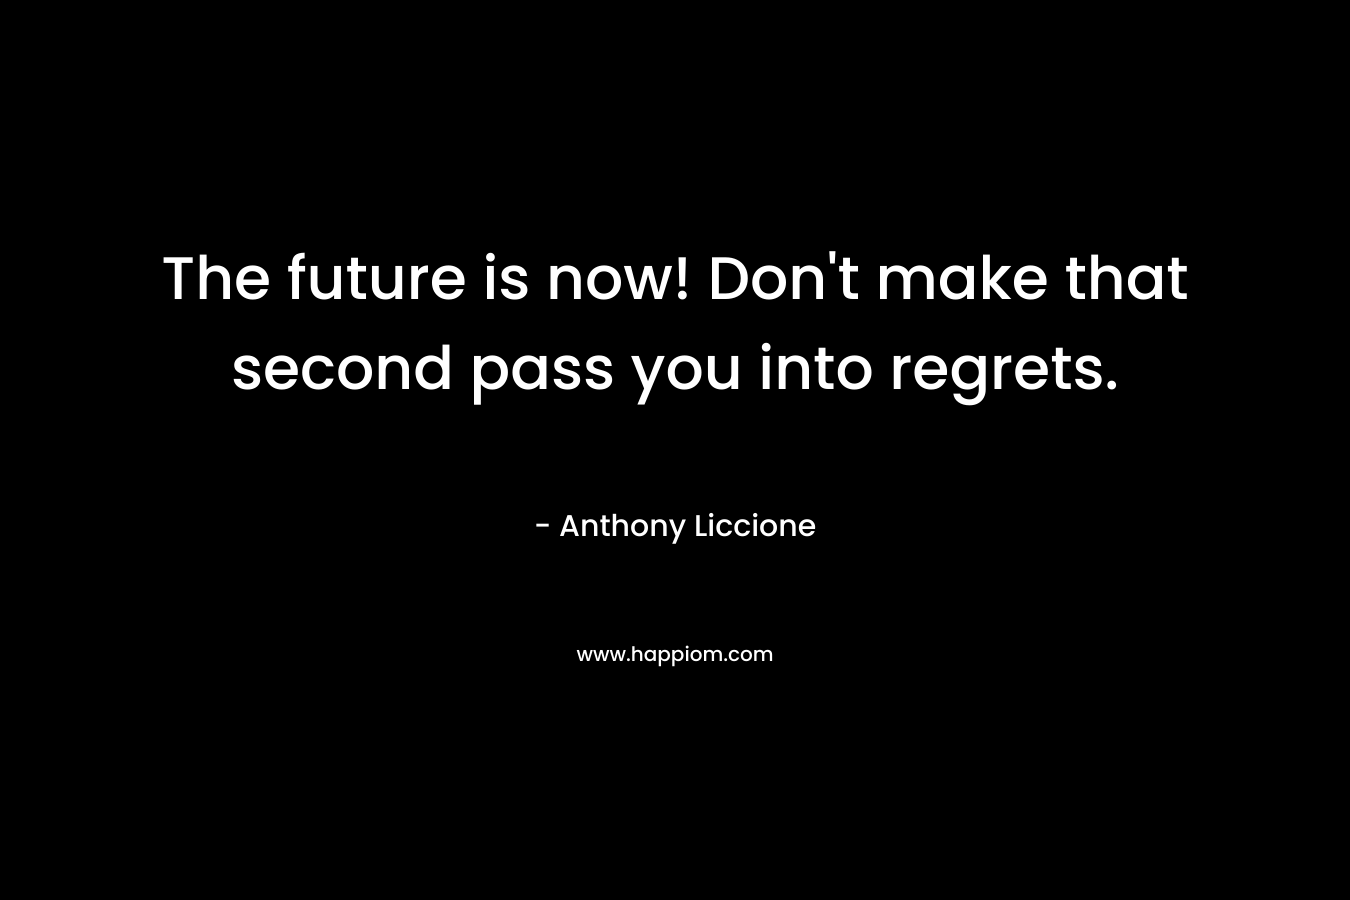 The future is now! Don't make that second pass you into regrets.